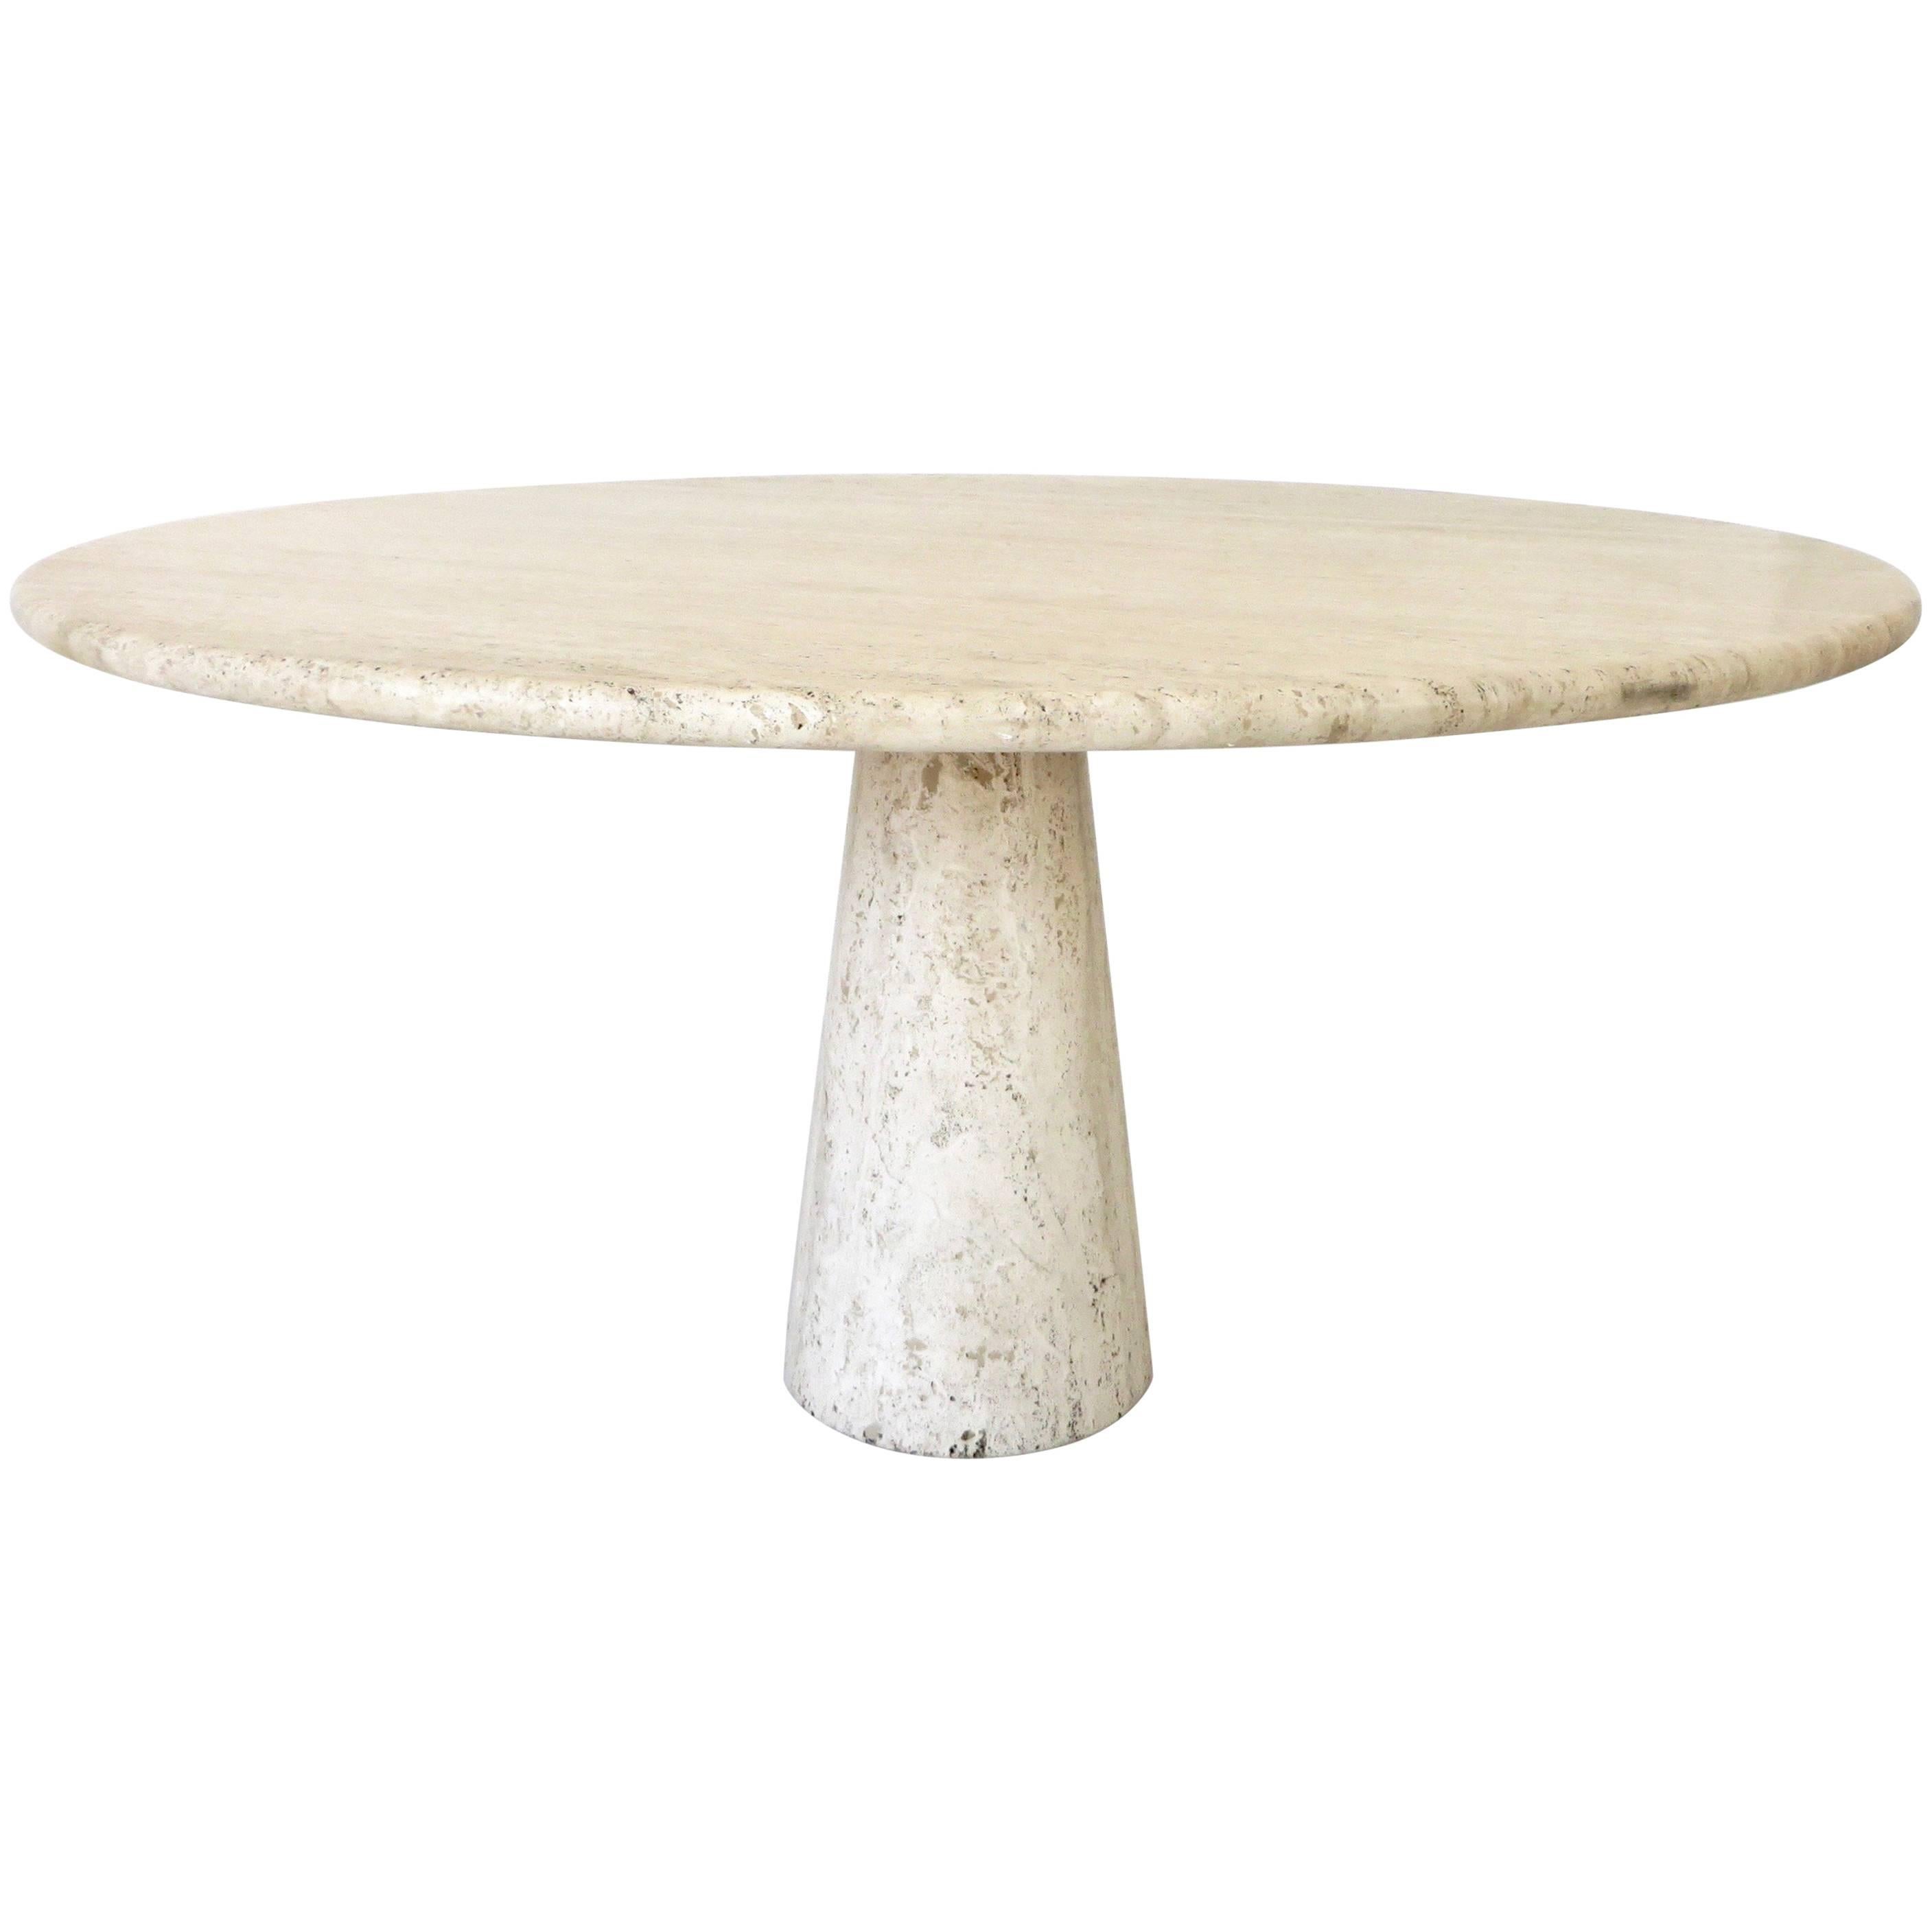 Italian Round Travertine Dining Table in the Style of Mangiarotti